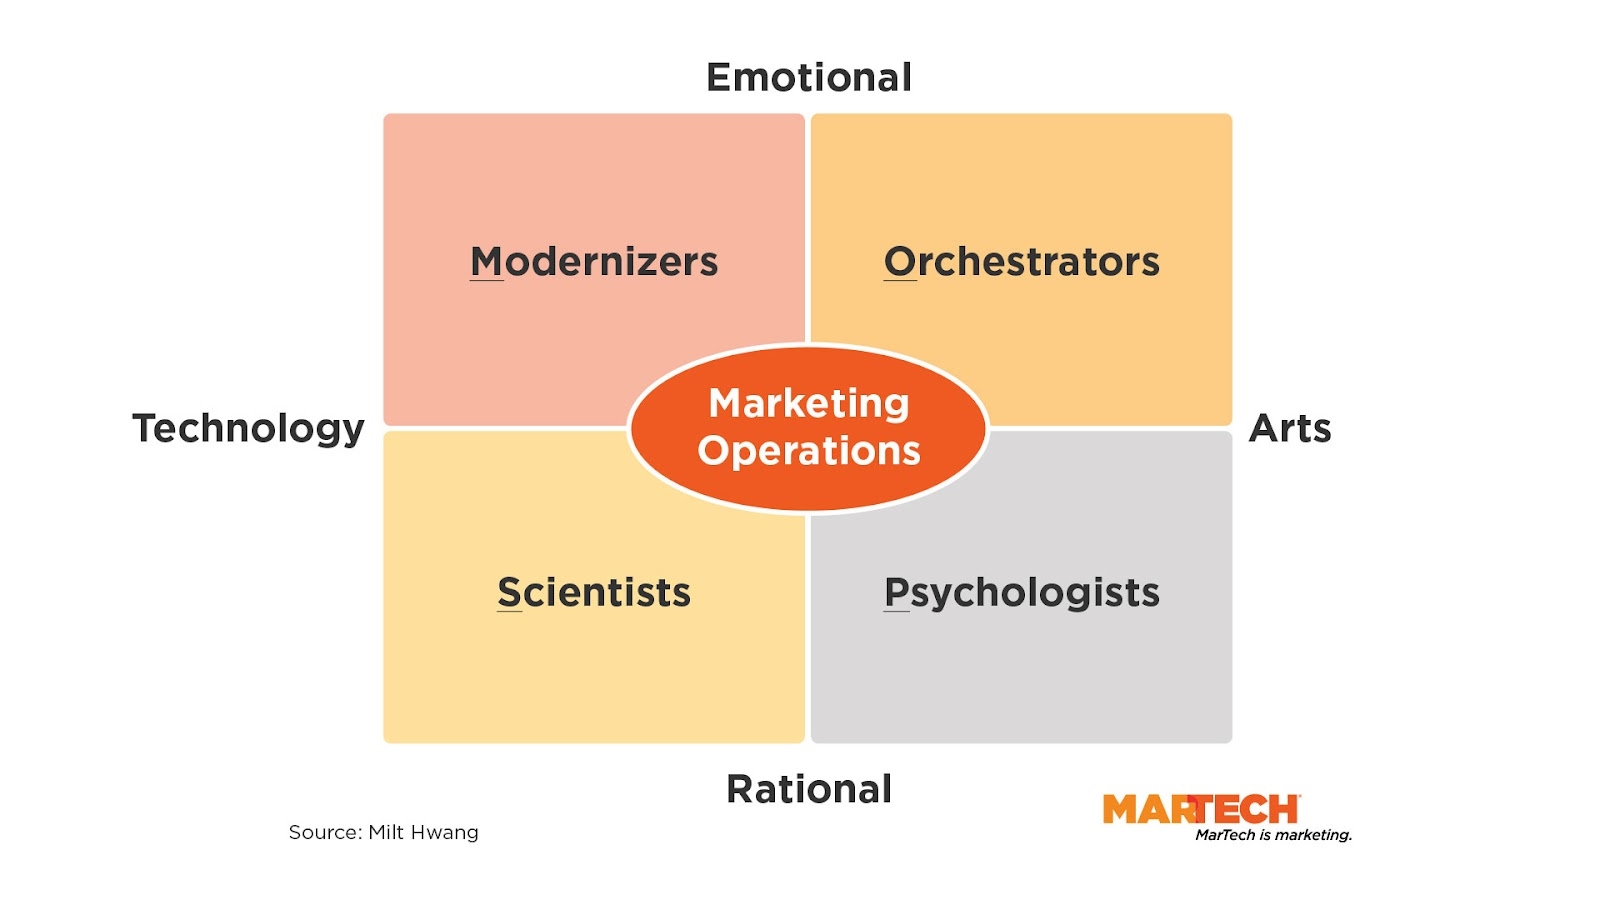 Orchestrators: the second key persona for modern marketing operations leaders